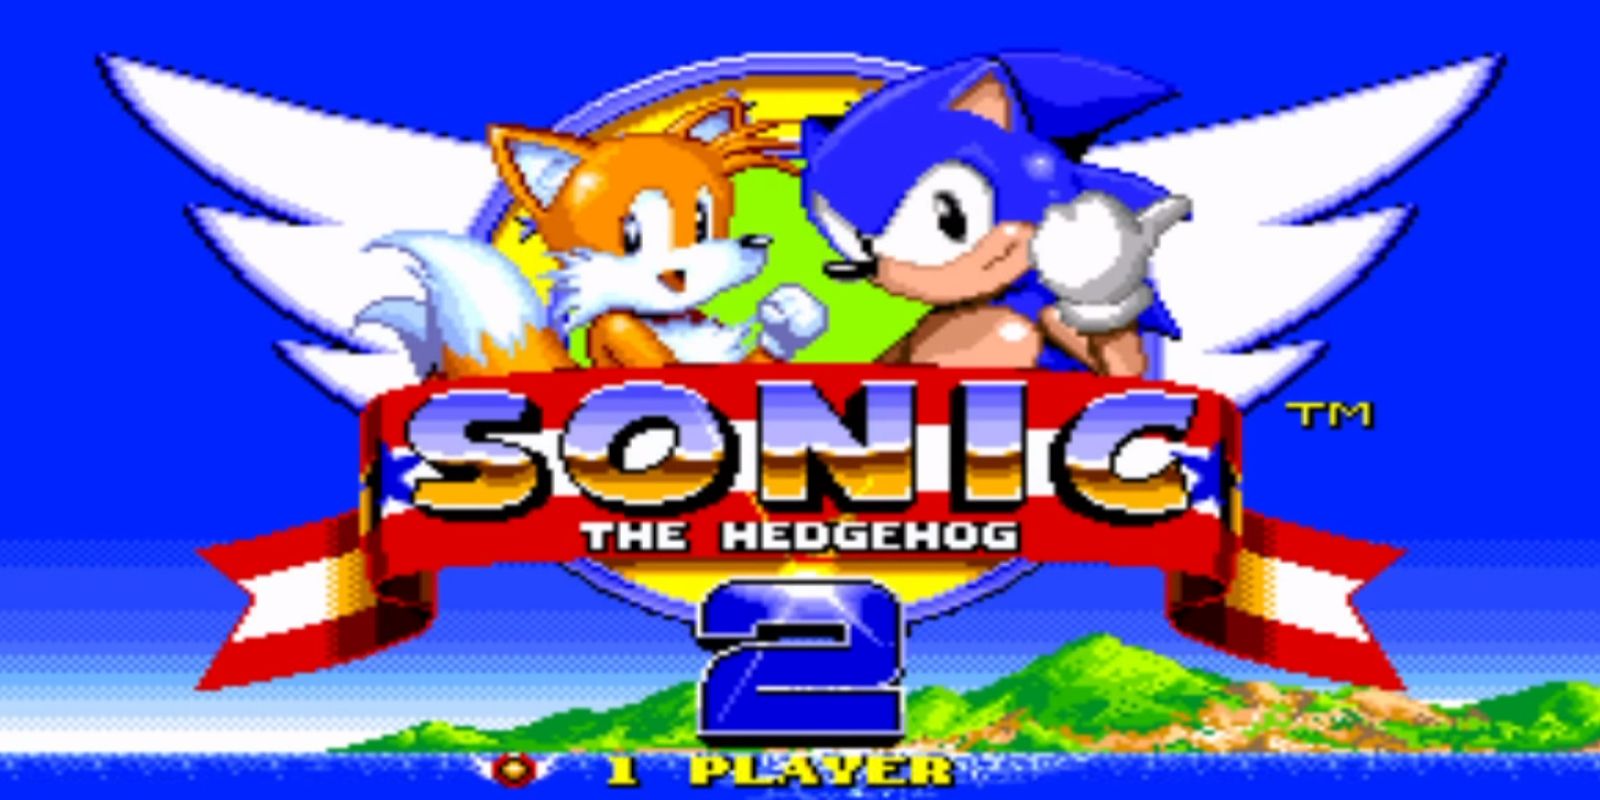 An image of Sonic The Hedgehog 2's title card, with Sonic and Tails smiling at the viewer.